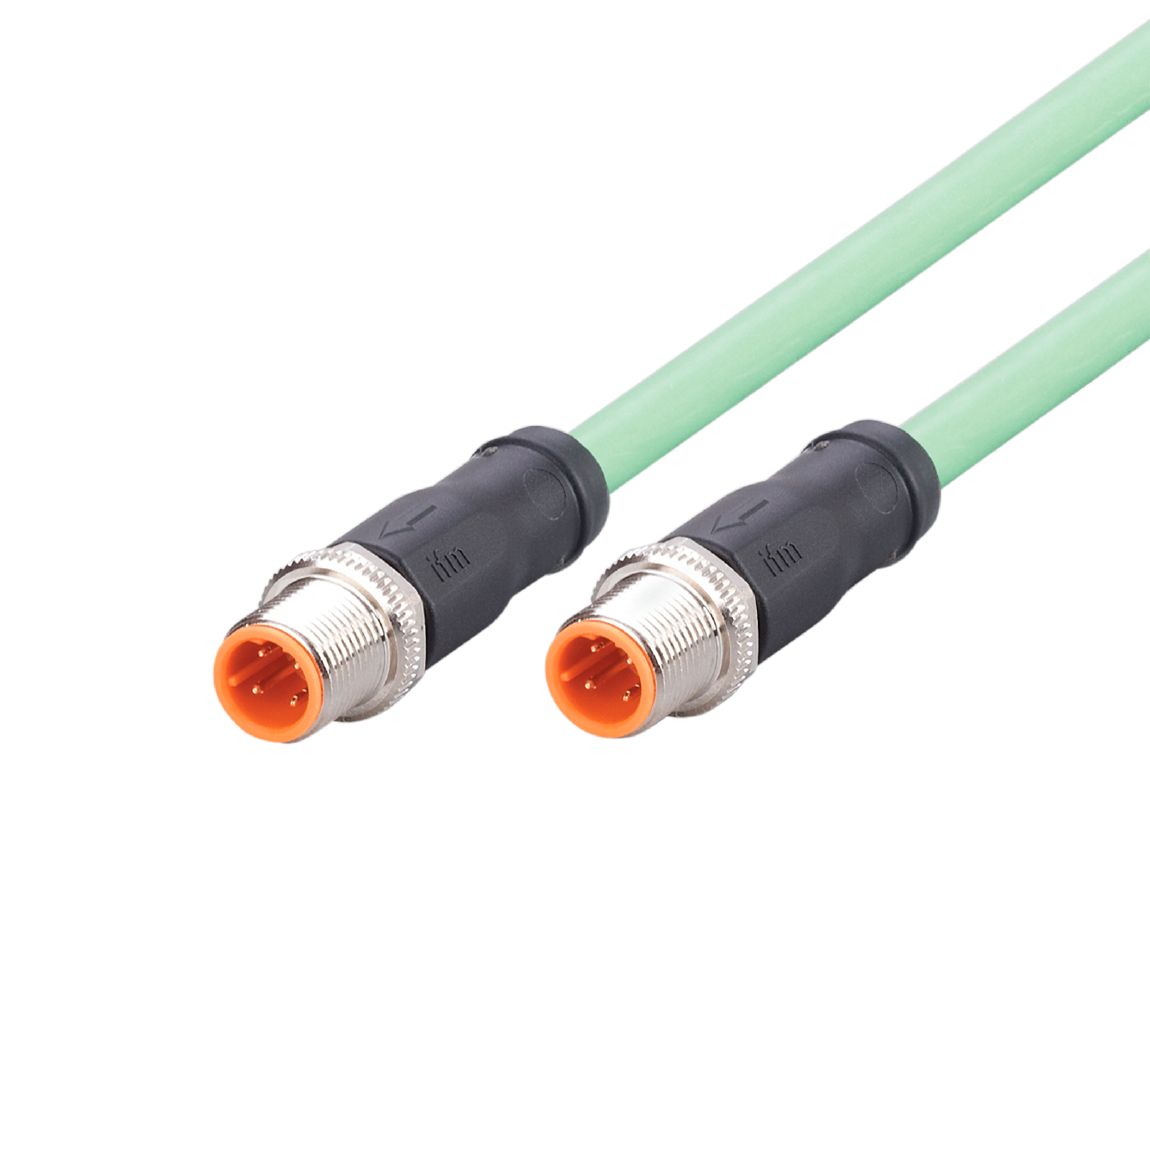 WIR1006 Cable Euroconector M-M 21pin 1,50m